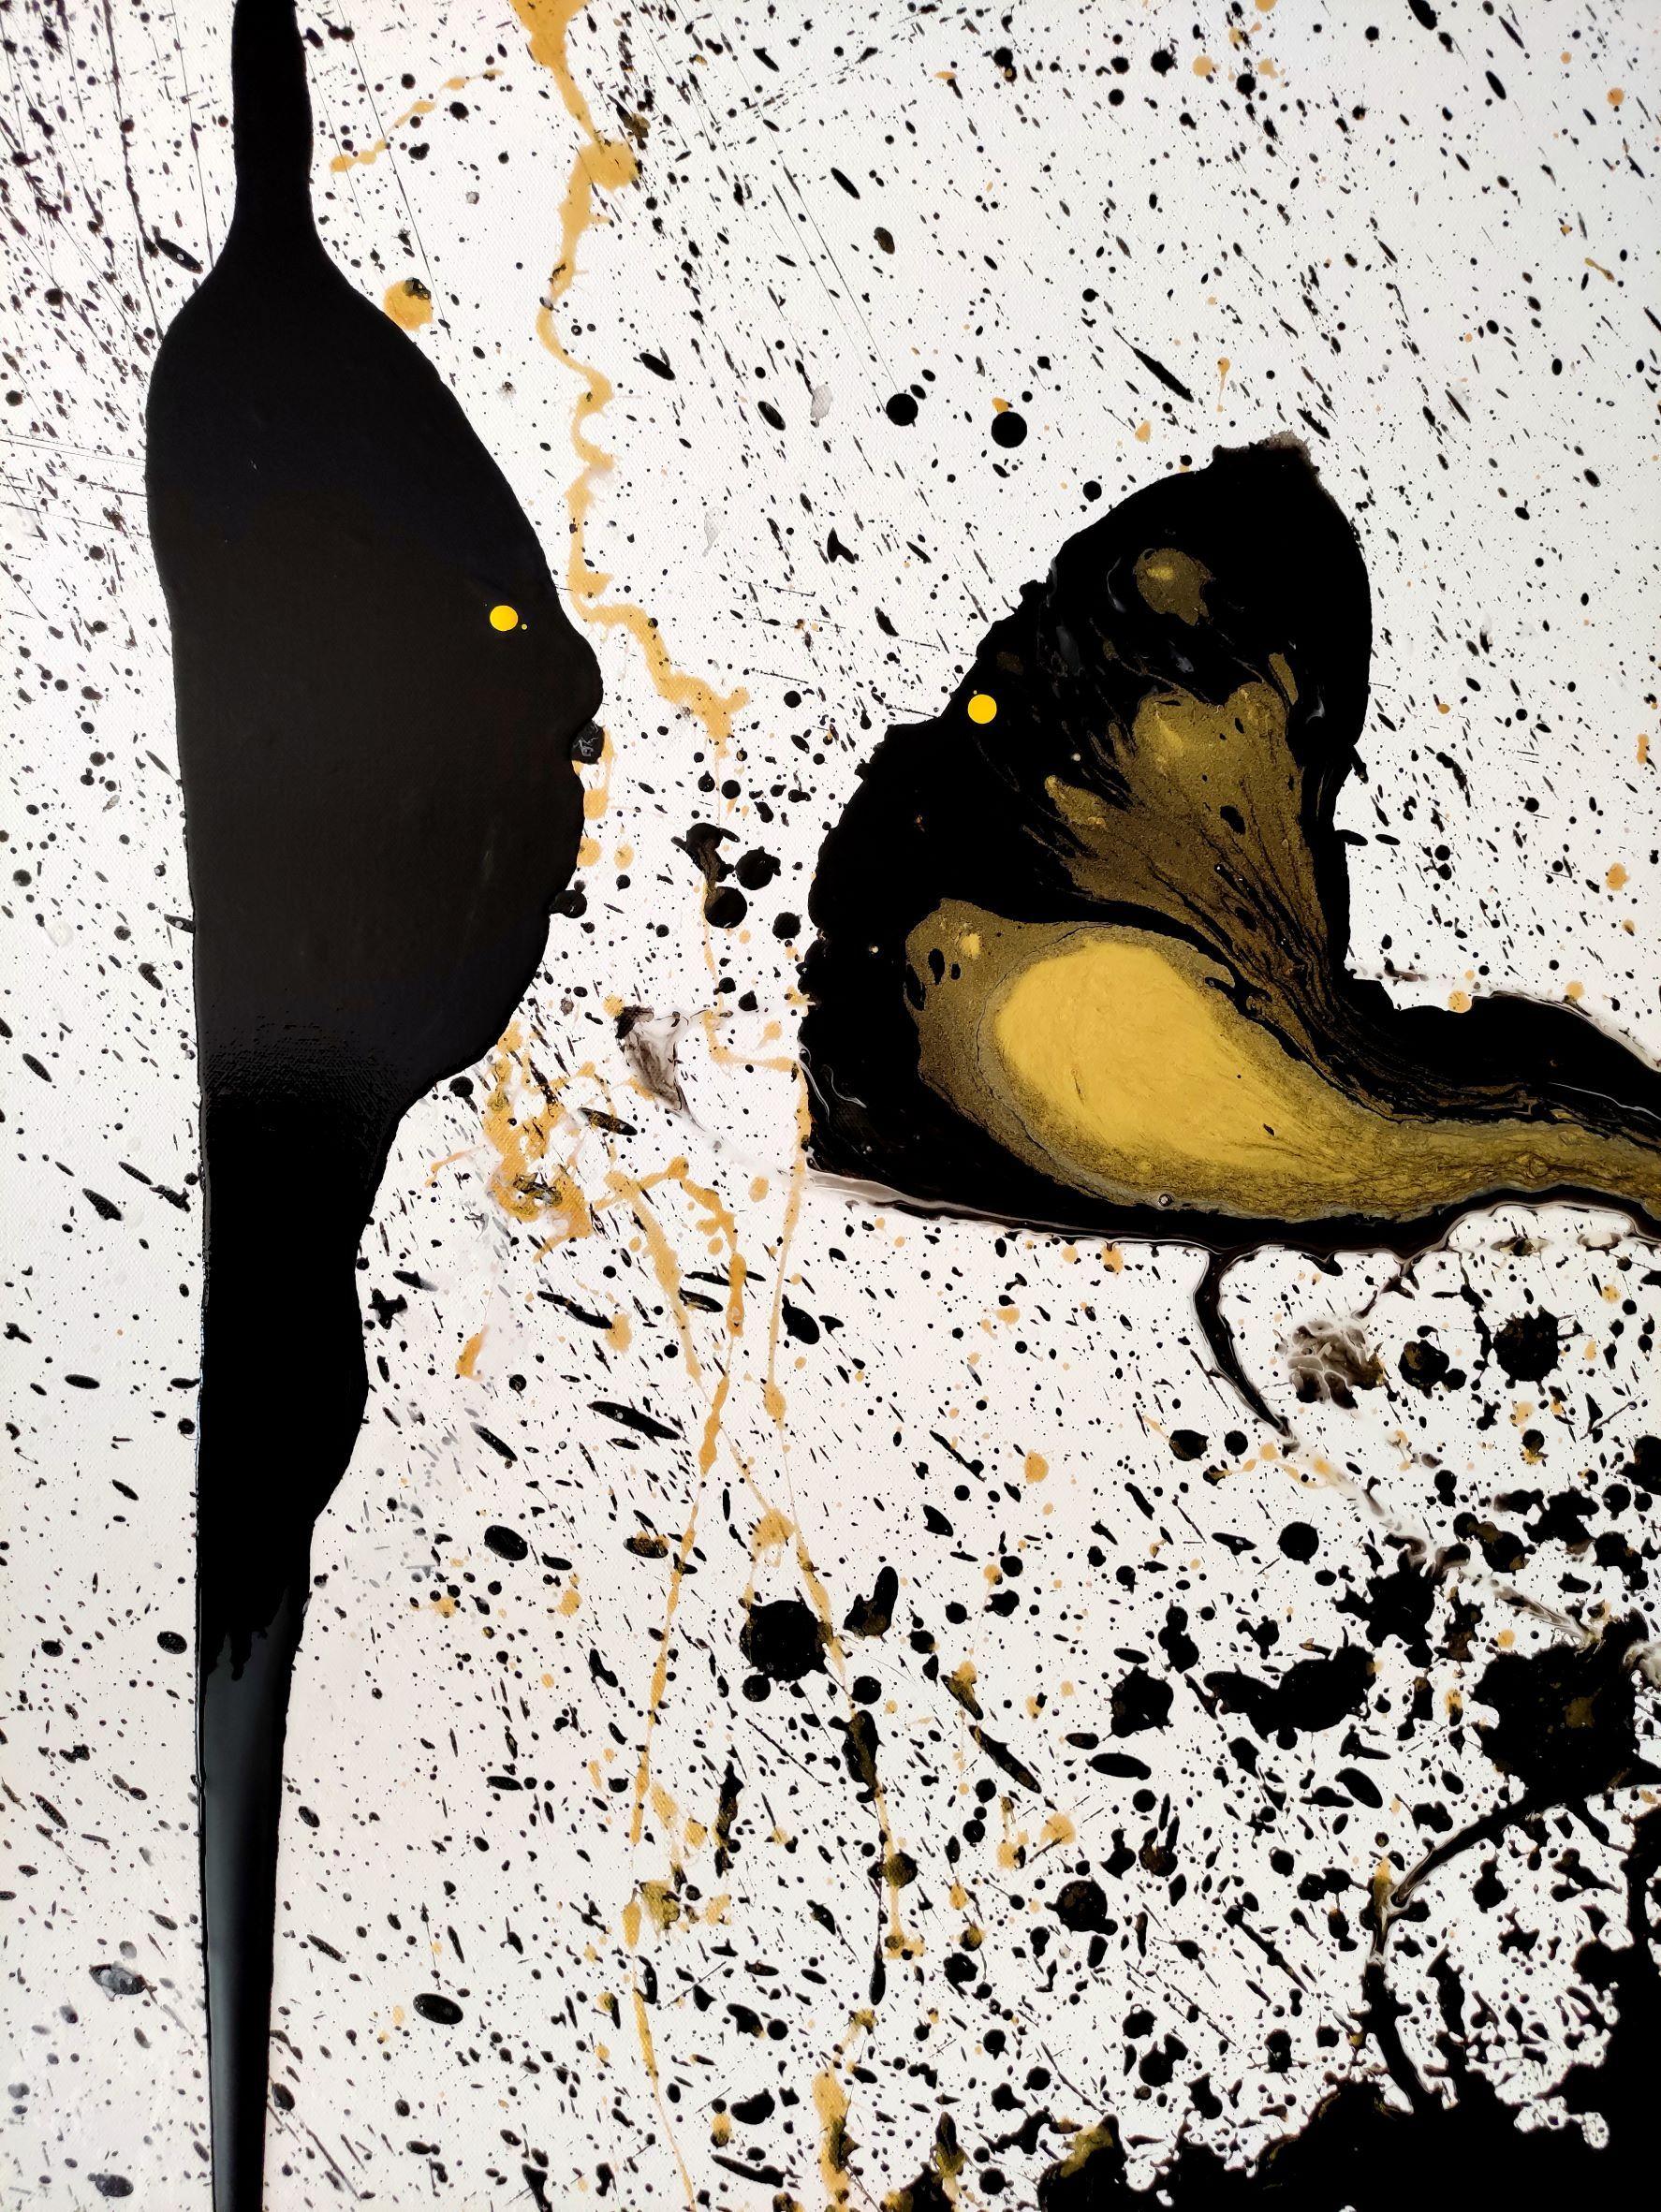 Abstract painting on canvas reflects the dialogue of two in-love souls. Black and gold colors develop the narrative through color transition and mixing. The story begins when the tense silence of the meeting eyes is interrupted by a sudden burst of